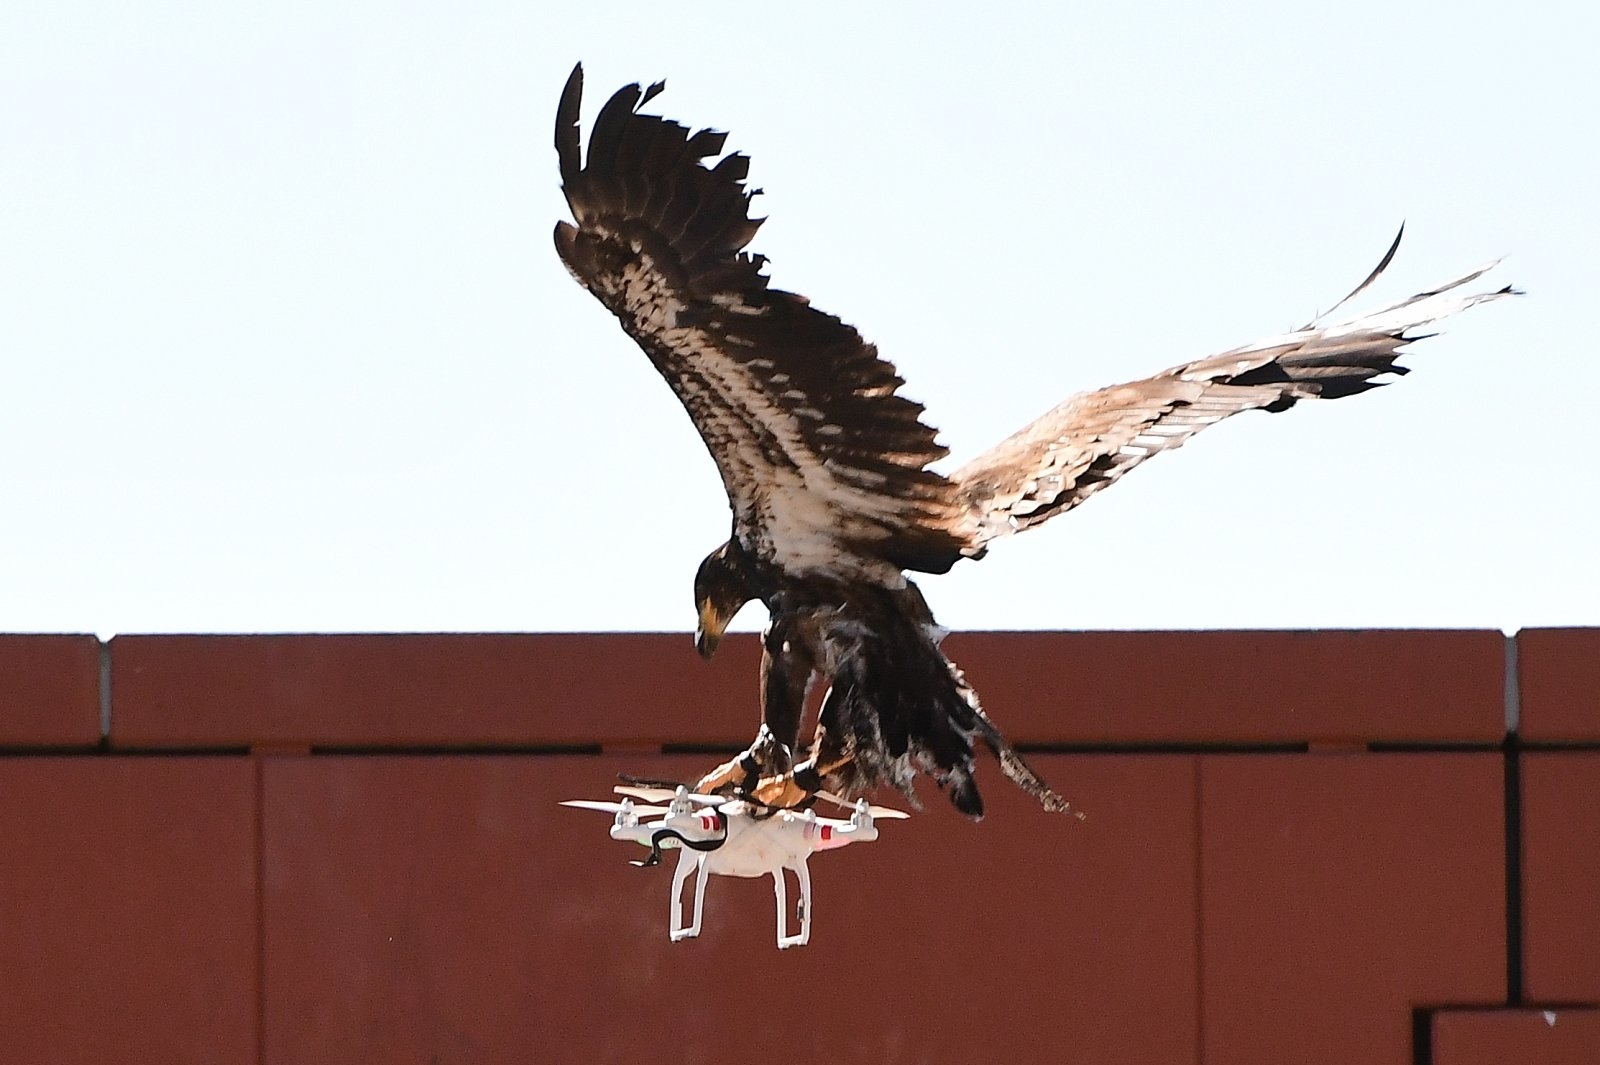 A young eagle trained to catch drones displays its skills during a demonstration organized by the Dutch police as part of a program to train birds of prey to catch drones flying over sensitive or restricted areas, at the Dutch Police Academy in Ossendrecht, The Netherlands, on September 12, 2016.   Dutch police are adopting a centuries-old pursuit to resolve the modern-day problem of increasing numbers of drones in the skies, becoming the world's first force to employ eagles as winged warriors. / AFP / EMMANUEL DUNAND        (Photo credit should read EMMANUEL DUNAND/AFP/Getty Images)